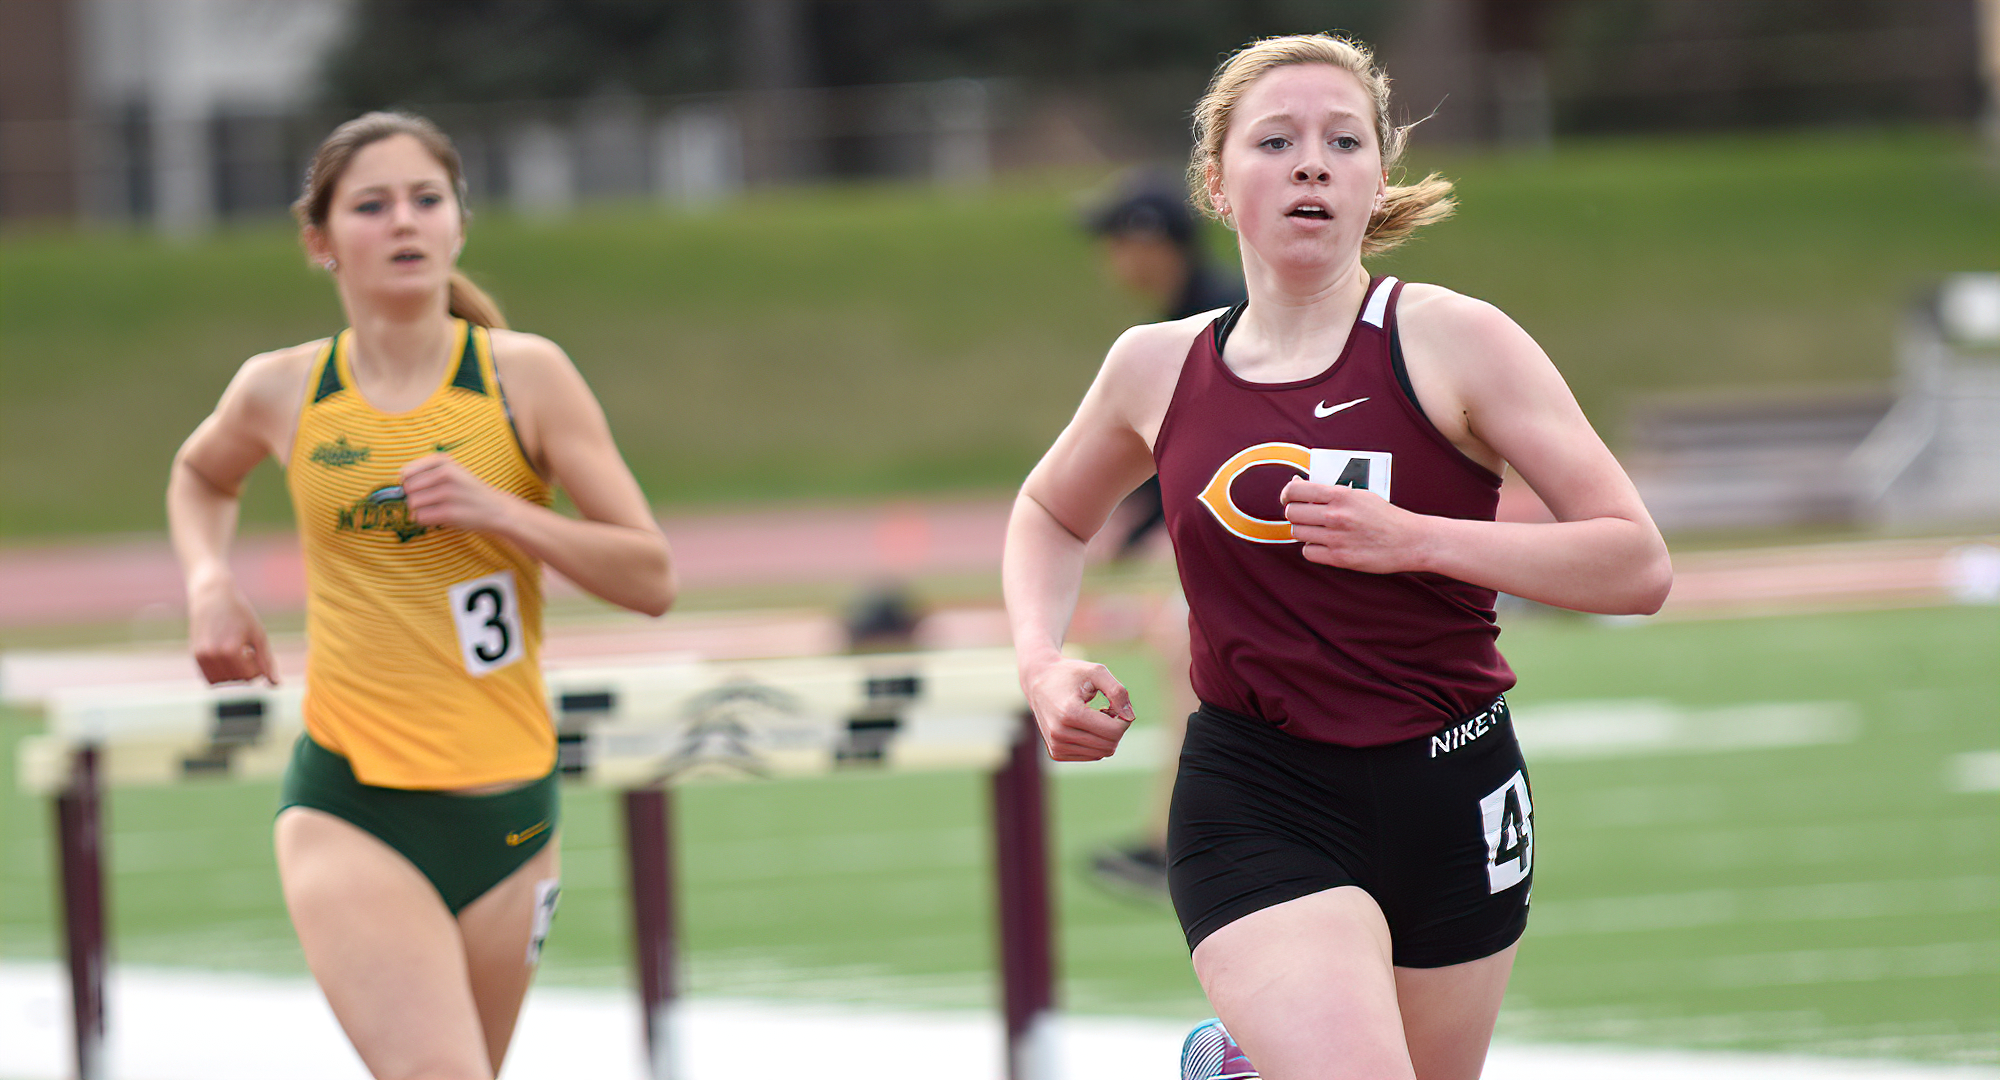 Josie Herrmann won the 800 meters at the Ron Masanz Classic on Saturday with a time that is the fastest in the MIAC this year and No.6 in Division III.